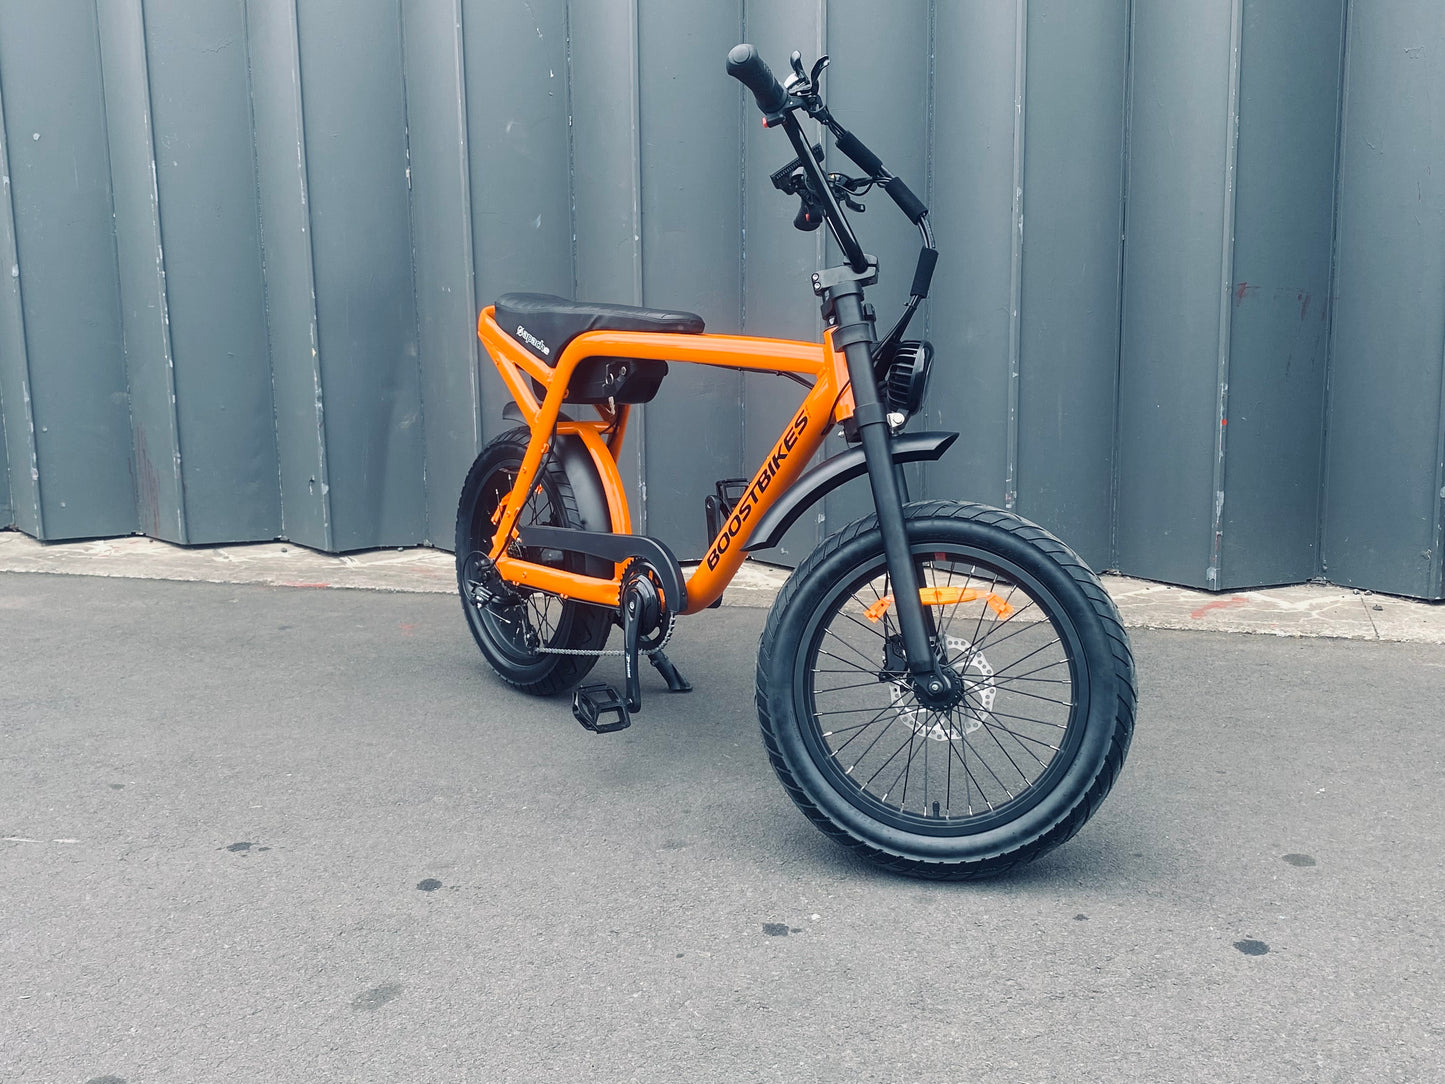 The Apache Electric Bike. Urban Explorer meets Retro Cool. From Boostbikes